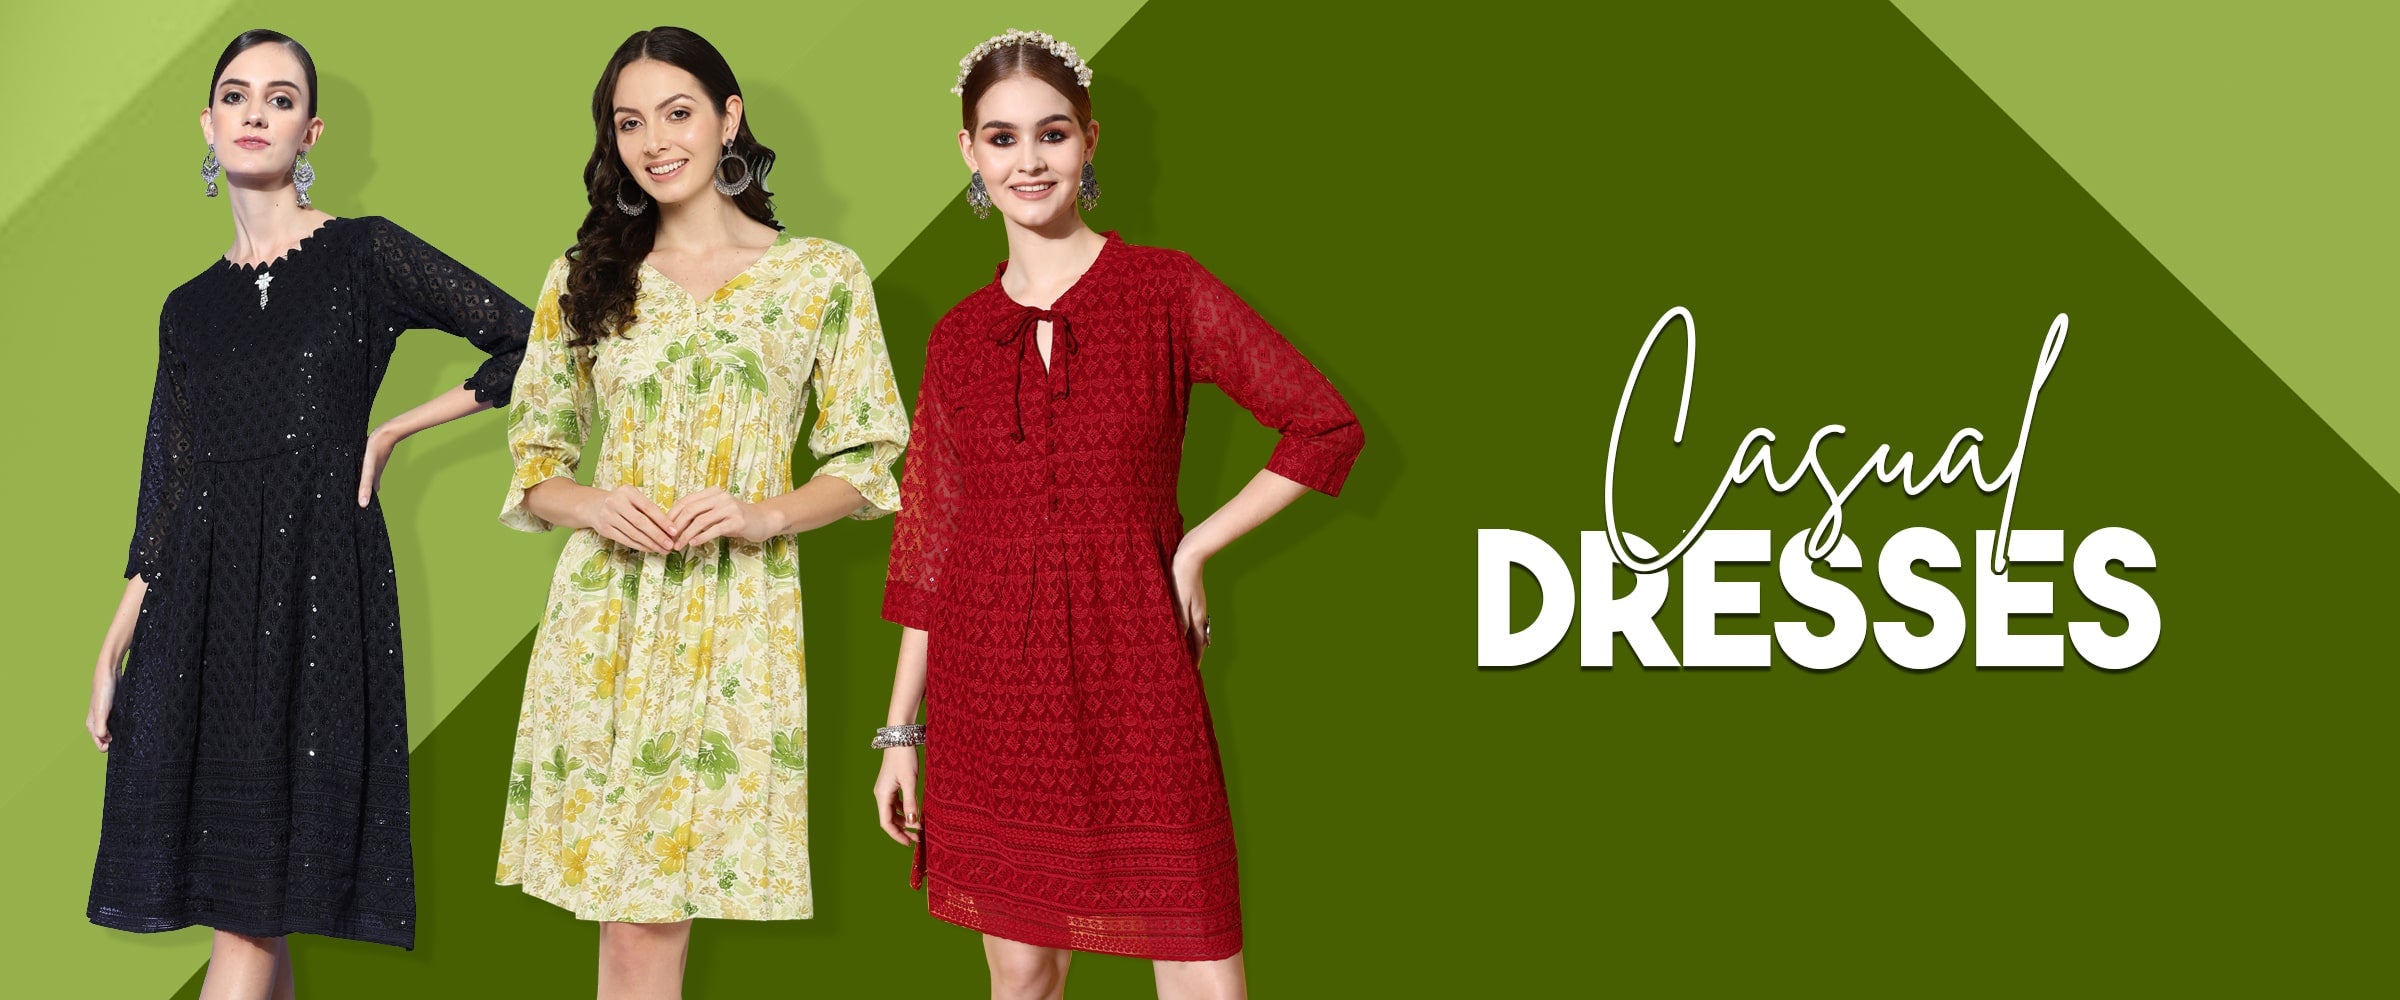 Dress the Part: Unlocking the Magic of 5 Casual Dresses for Every Occasion for Women